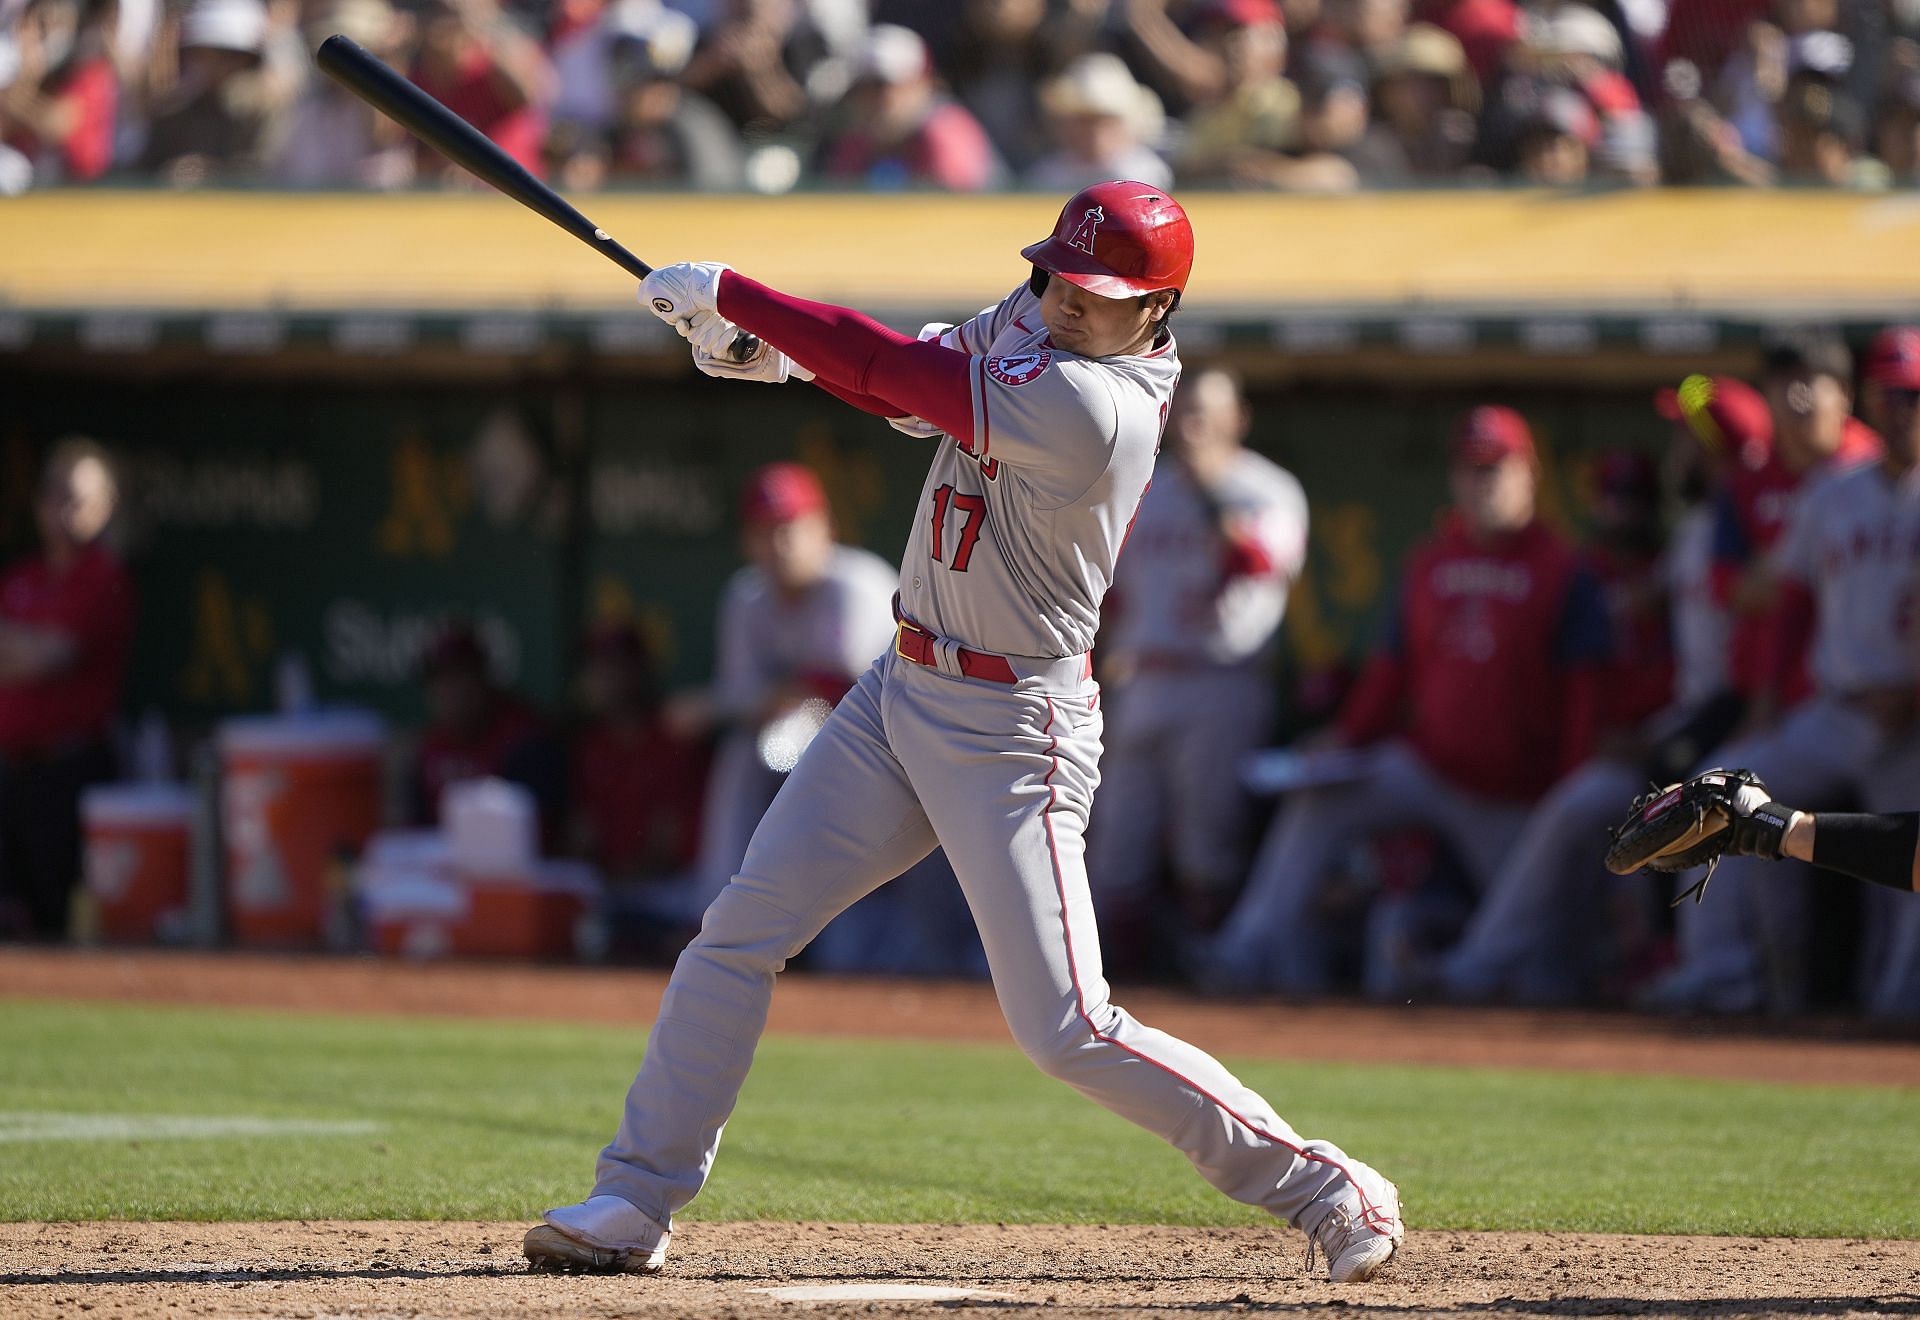 Opinion: Shohei Ohtani is the face and future of baseball - The Occidental